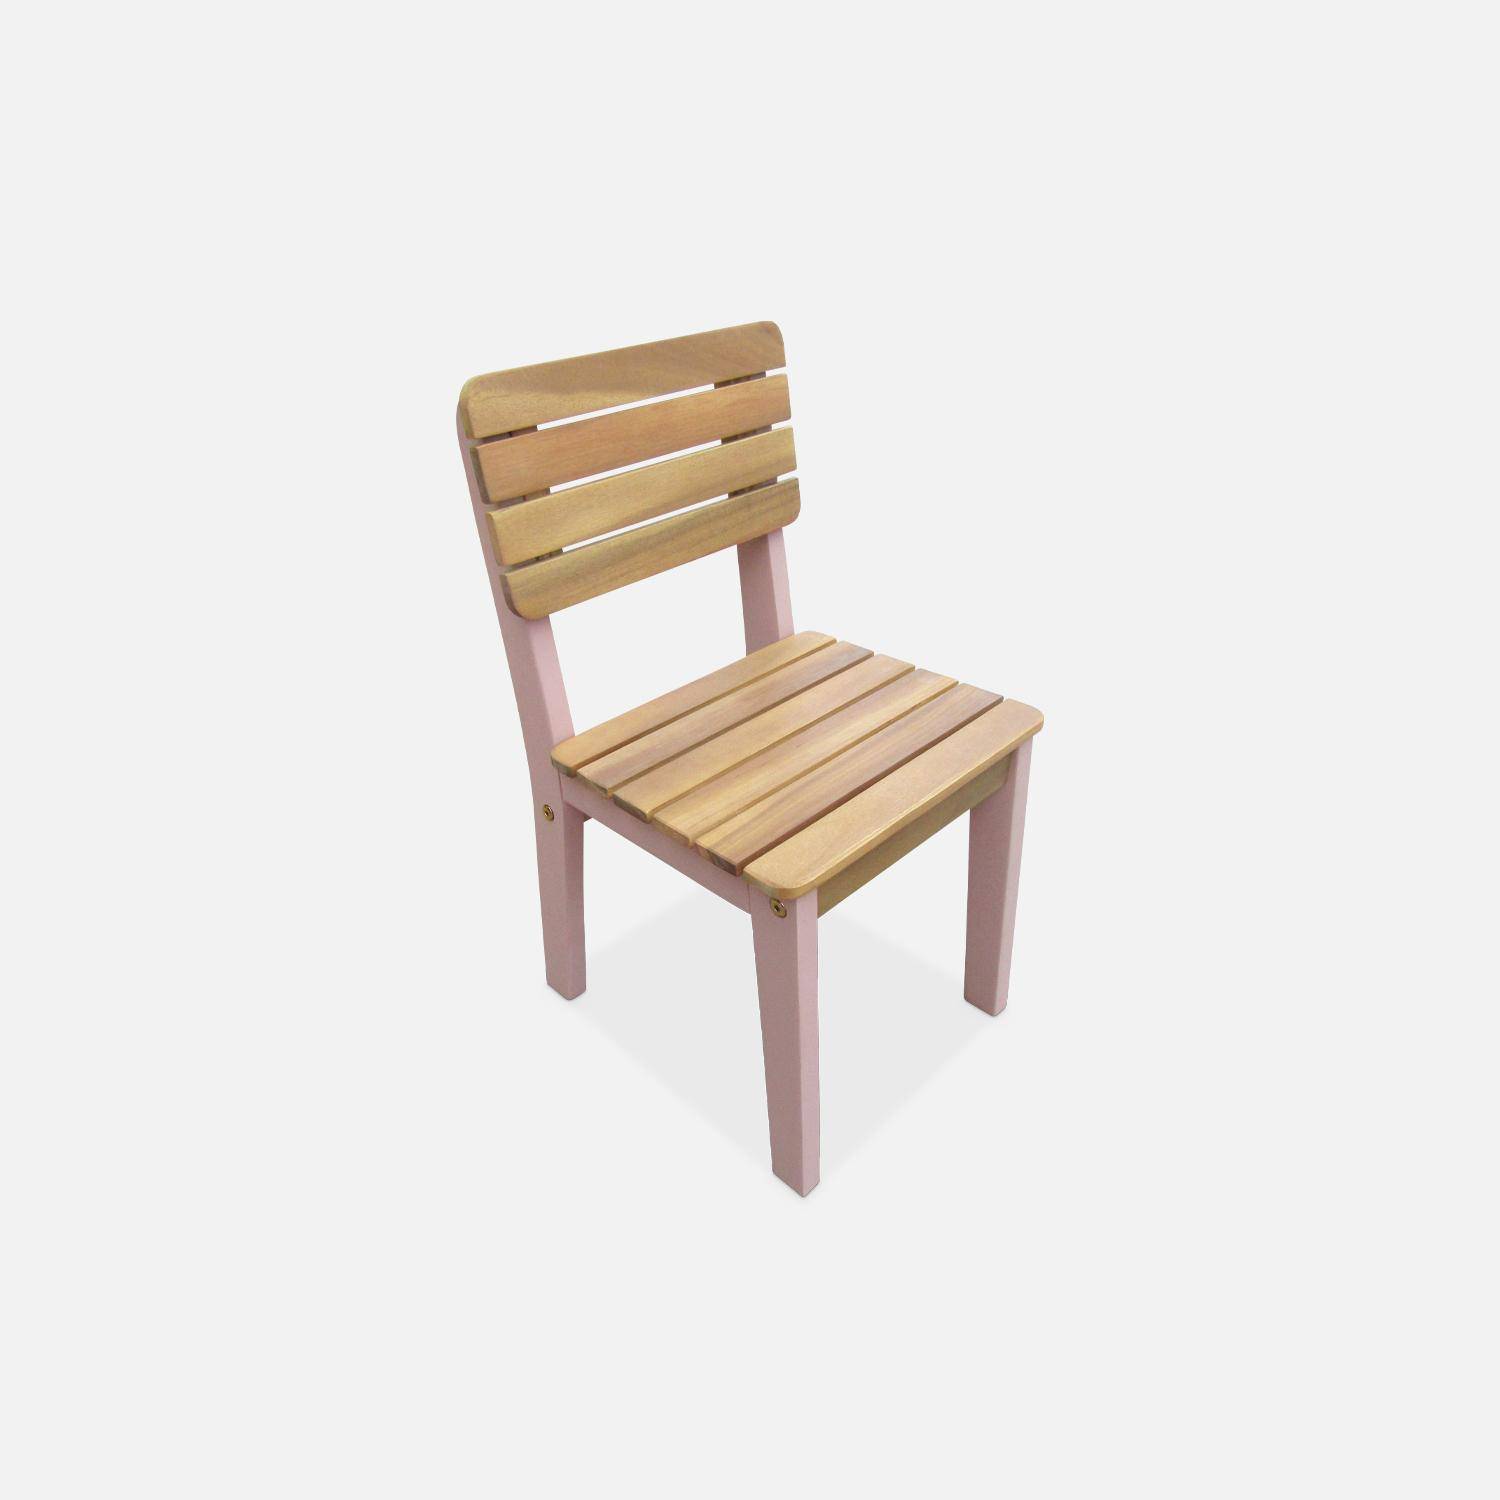 Solid Wood Chairs for Children, Indoor/Outdoor (Set of 2), pink, L29 x D31.5 x H53 cm,sweeek,Photo5